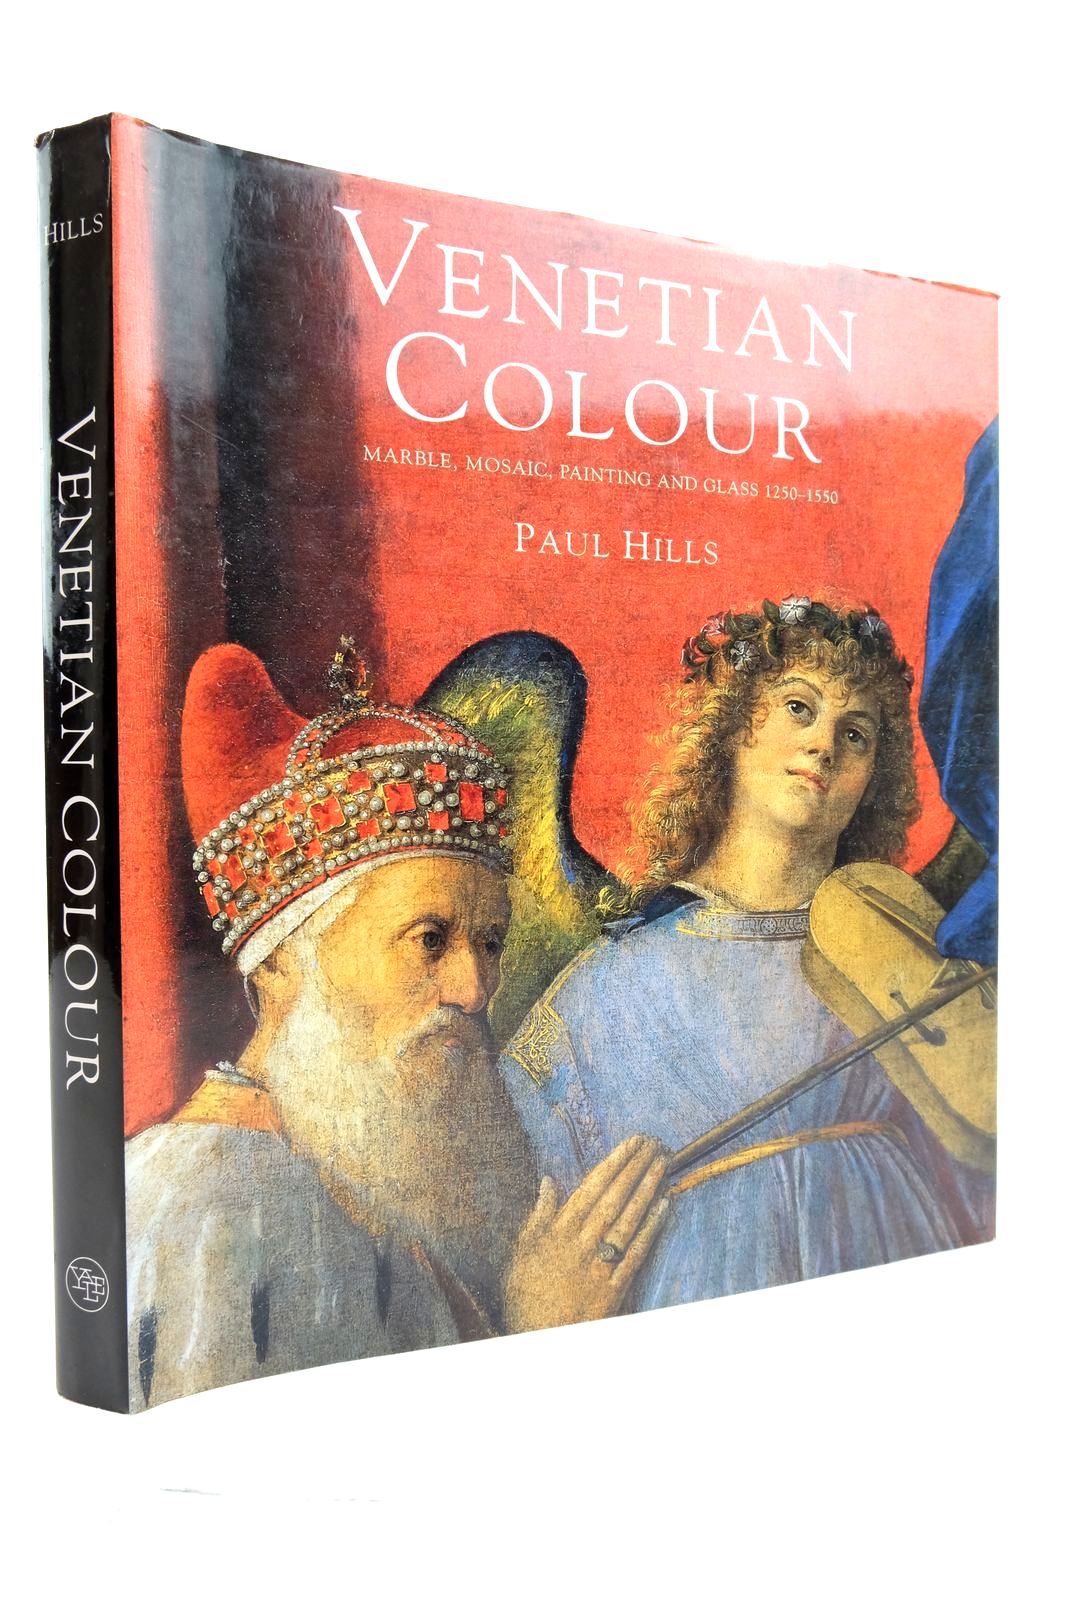 Photo of VENETIAN COLOUR MARBLE, MOSAIC, PAINTING AND GLASS 1250-1550 written by Hills, Paul published by Yale University Press (STOCK CODE: 2138949)  for sale by Stella & Rose's Books